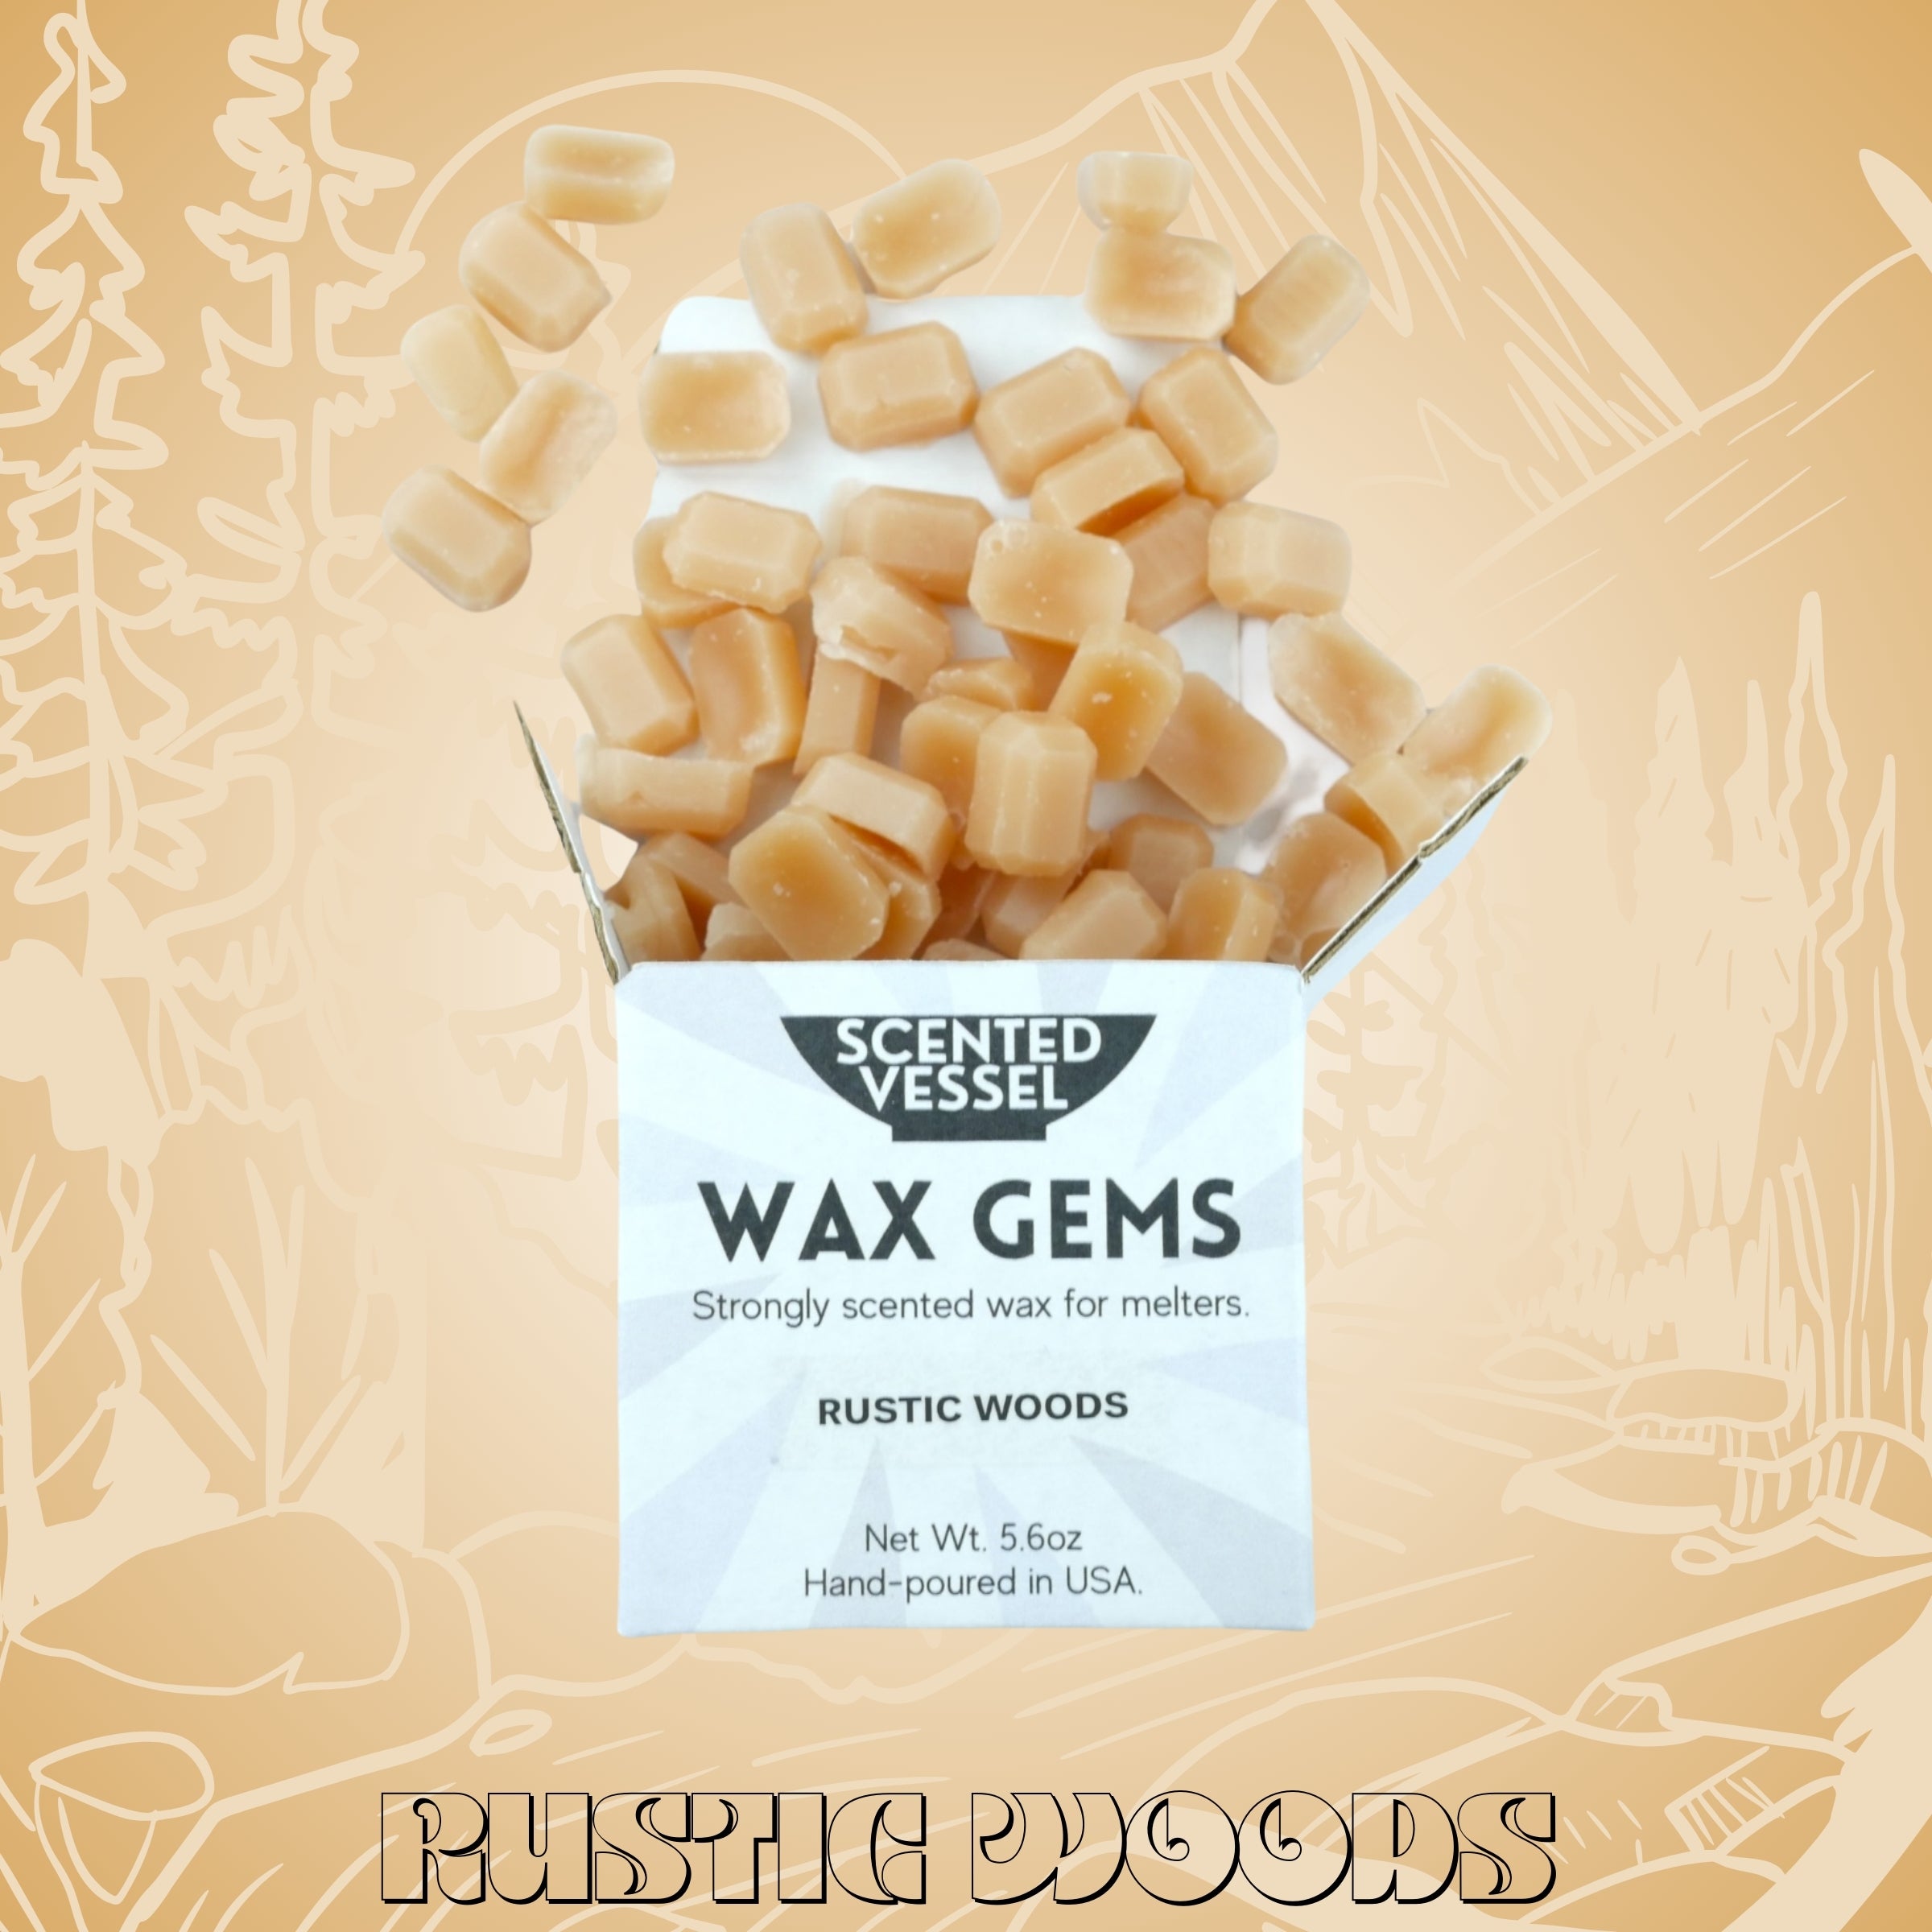 Rustic Woods 5.6oz Wax Gems by Scented Vessel